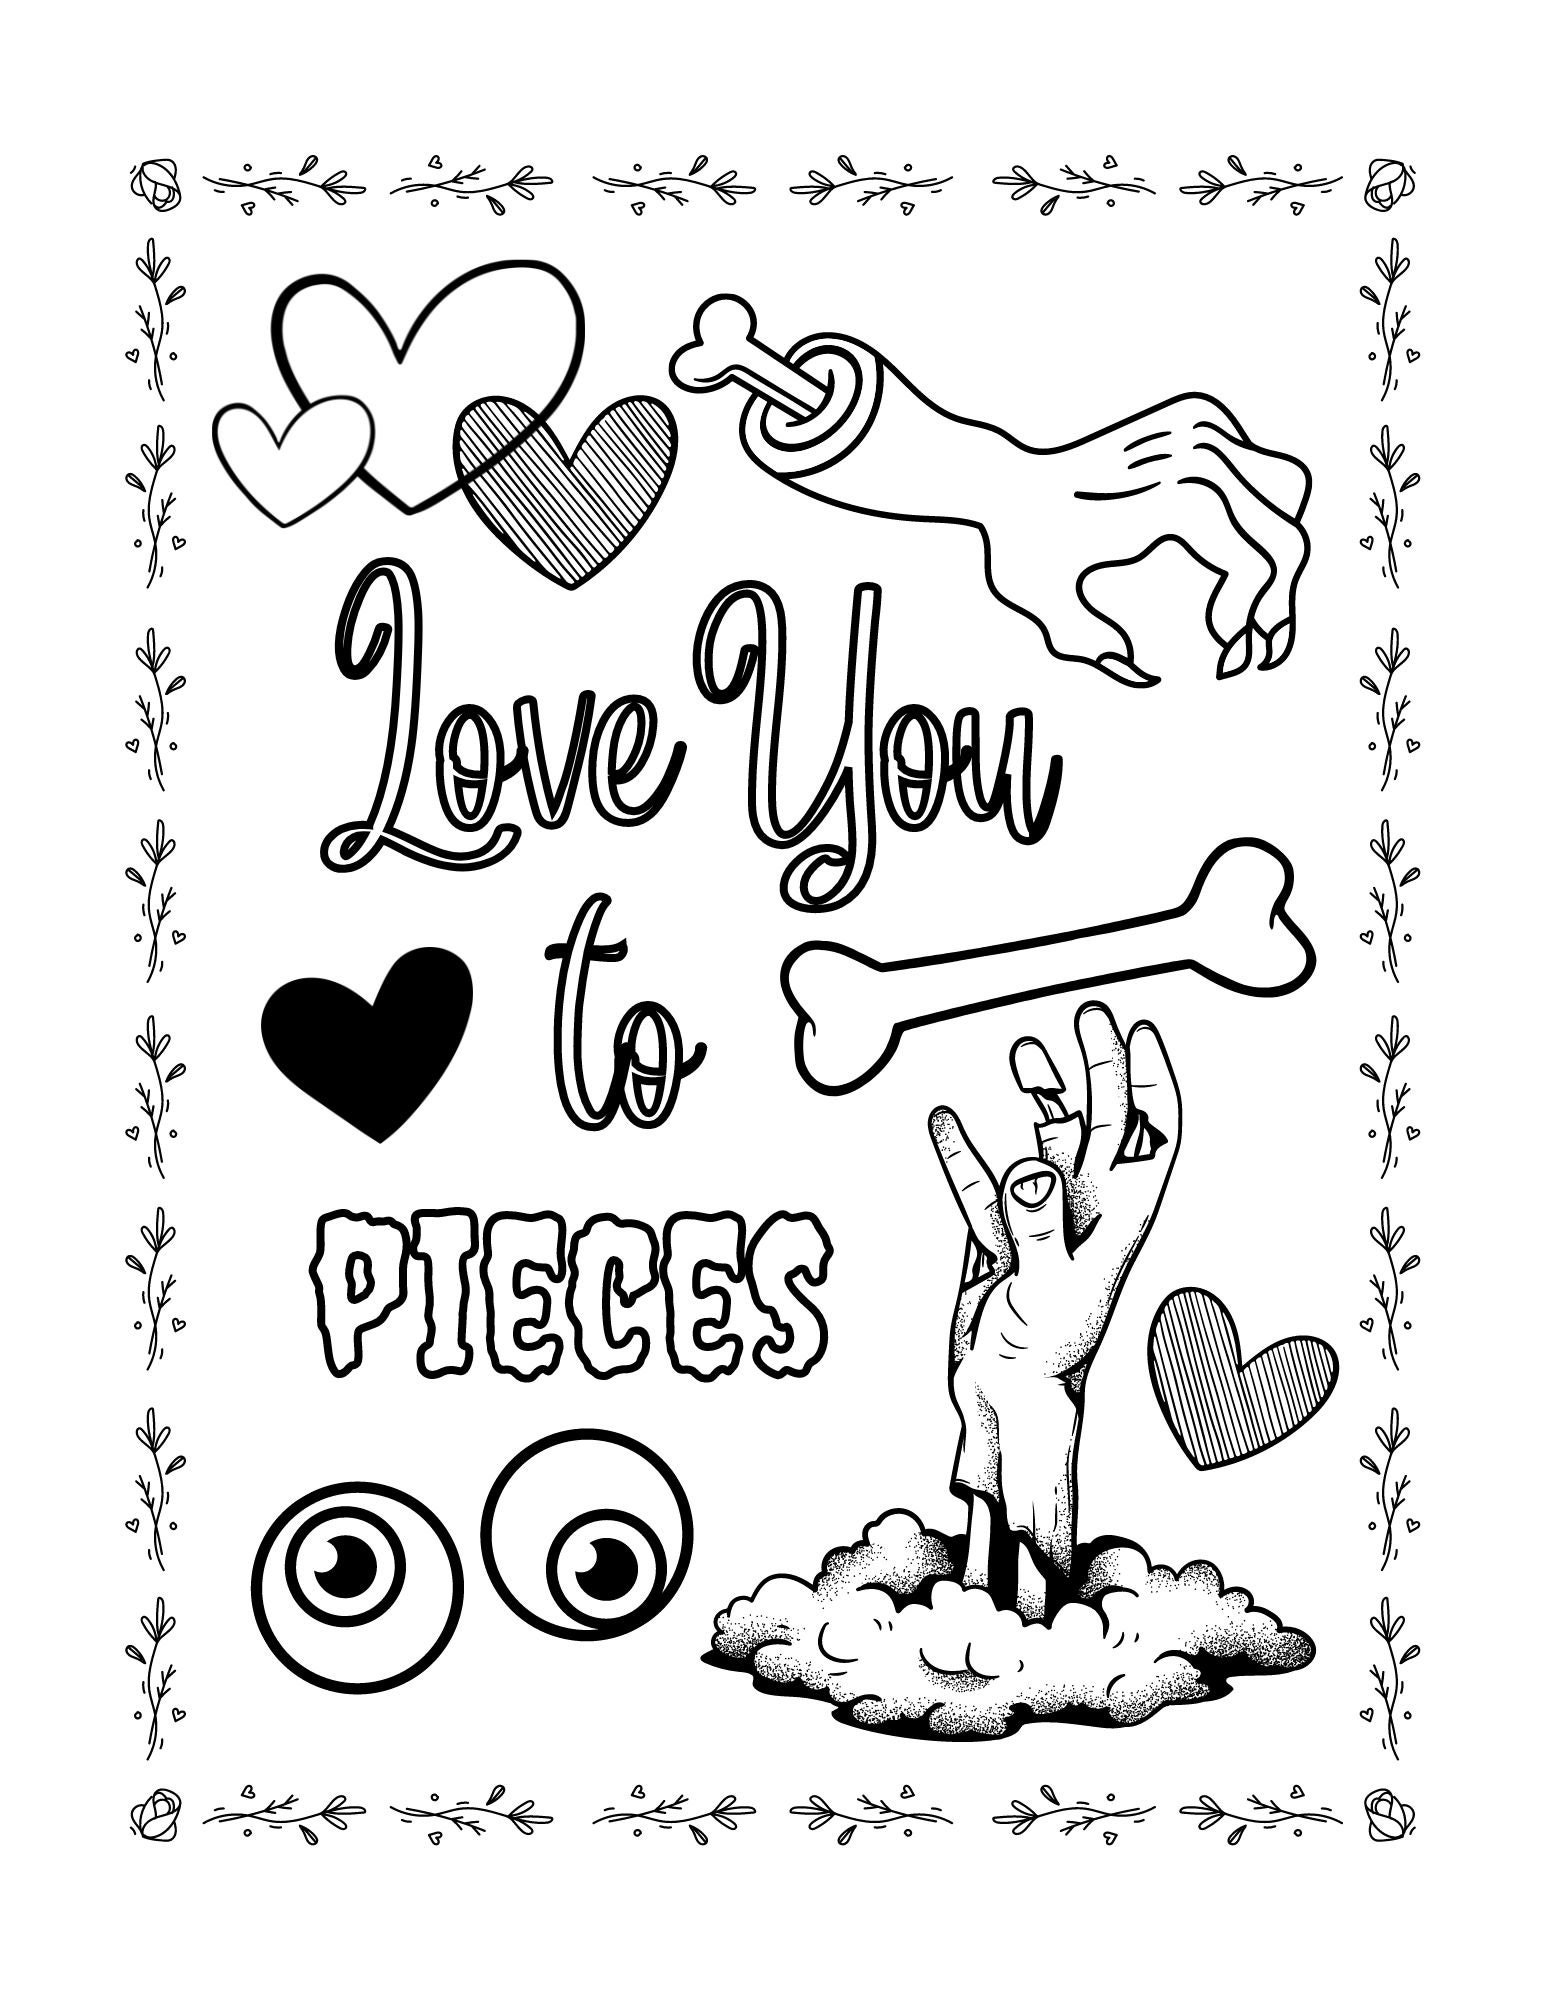 Love you to pieces valentines pun spooky theme coloring page download now